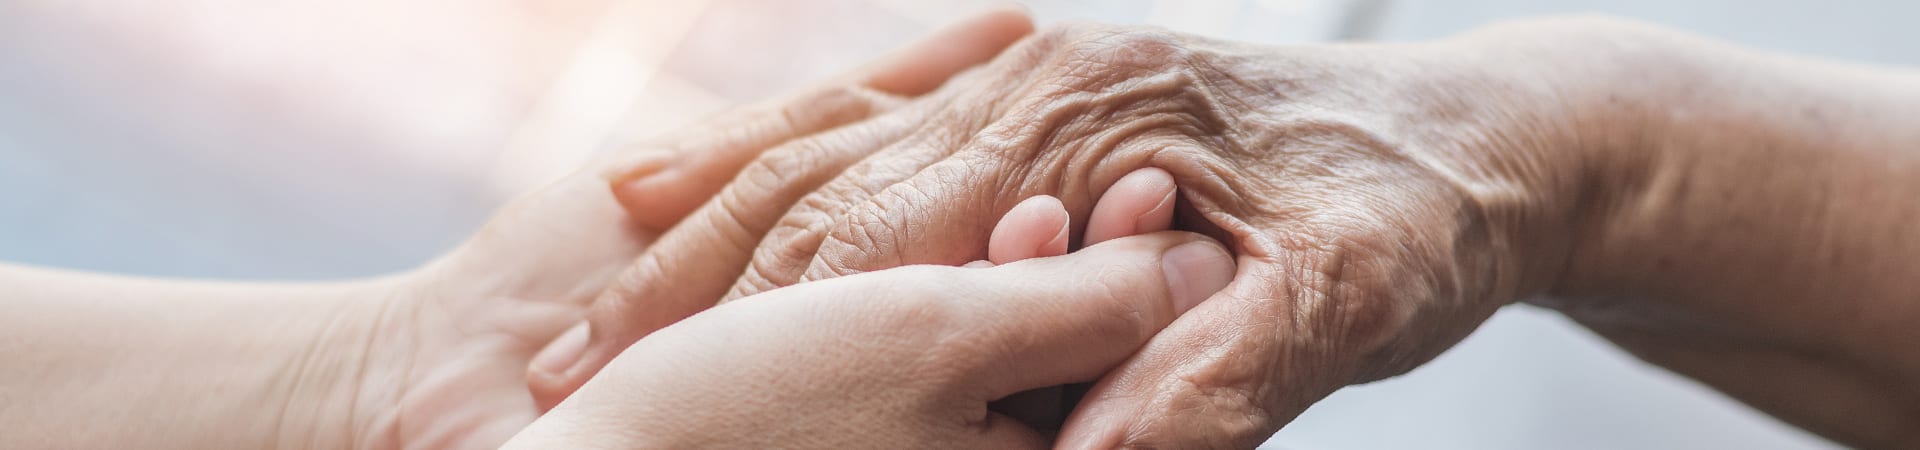 A closeup of a caregiver's hands holding a senior's hands in support